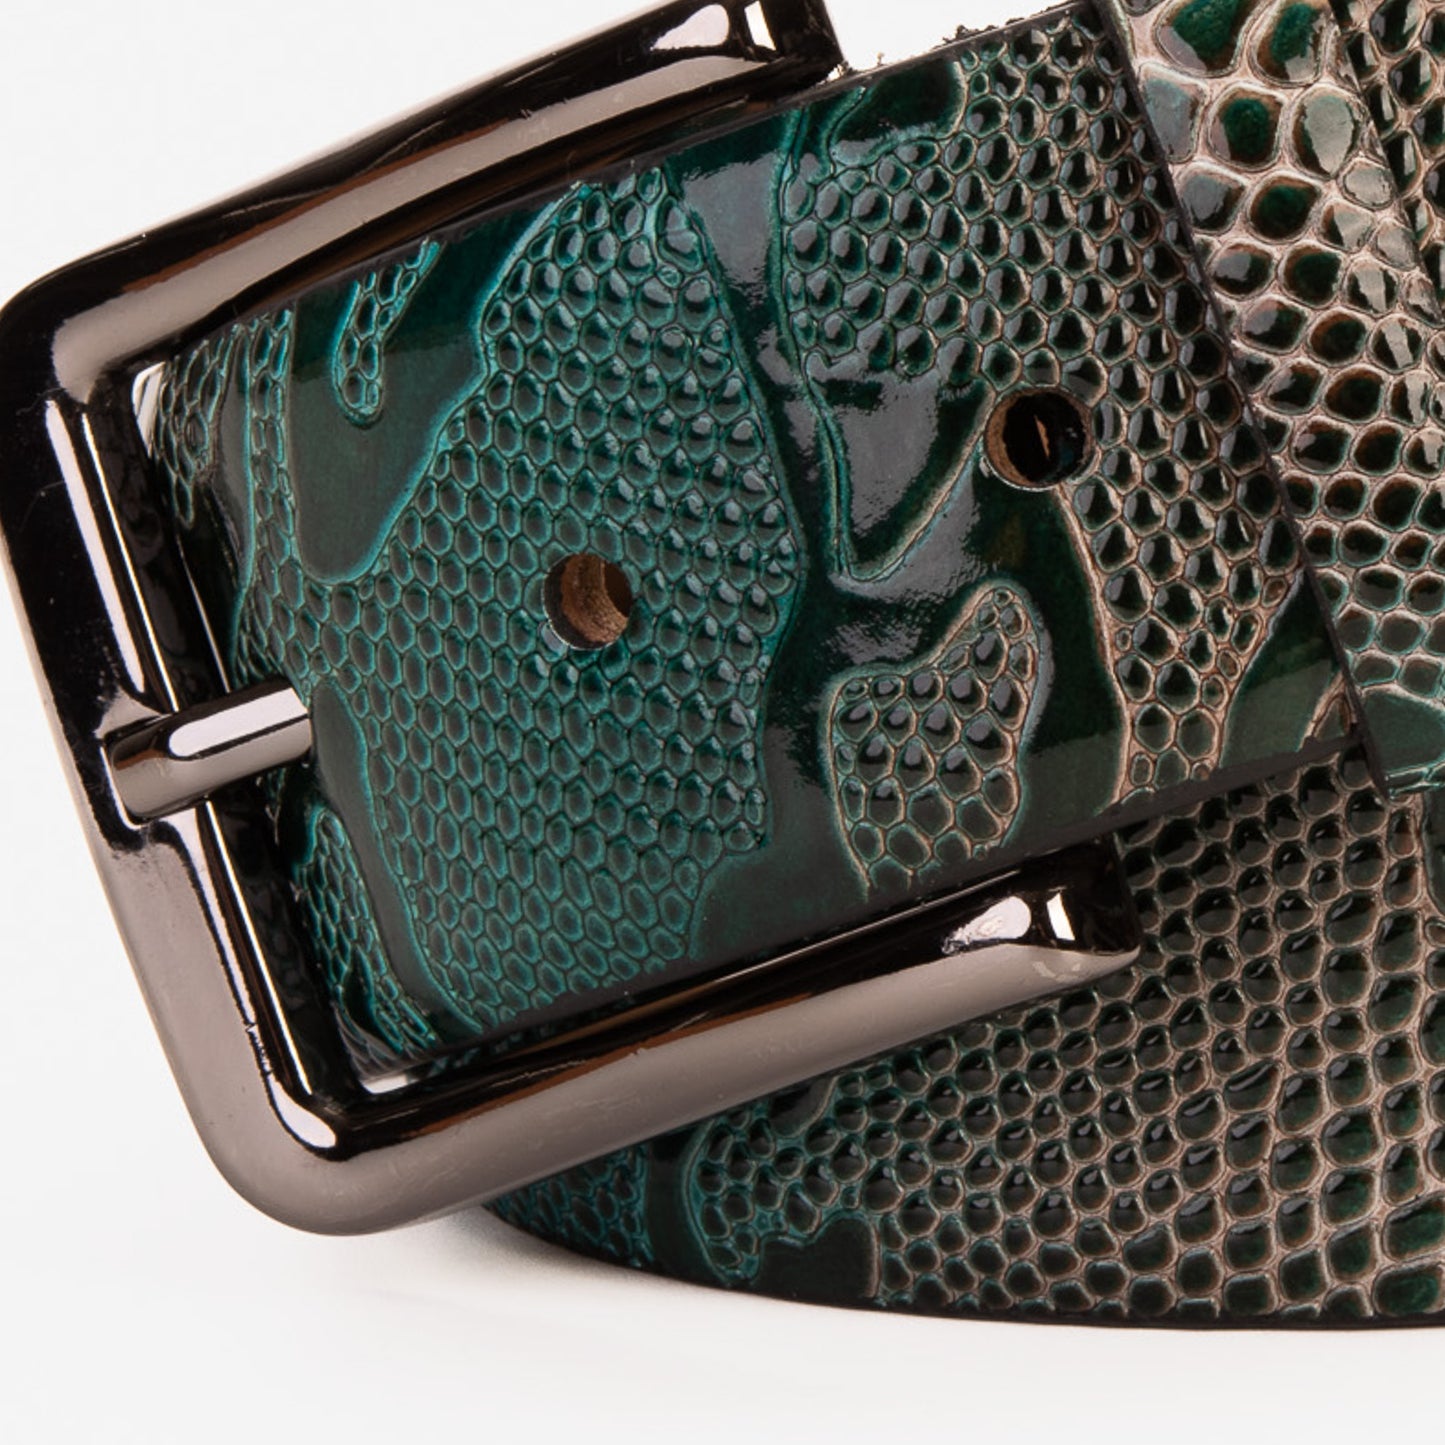 The Milano Green Leather Belt Limited Edition